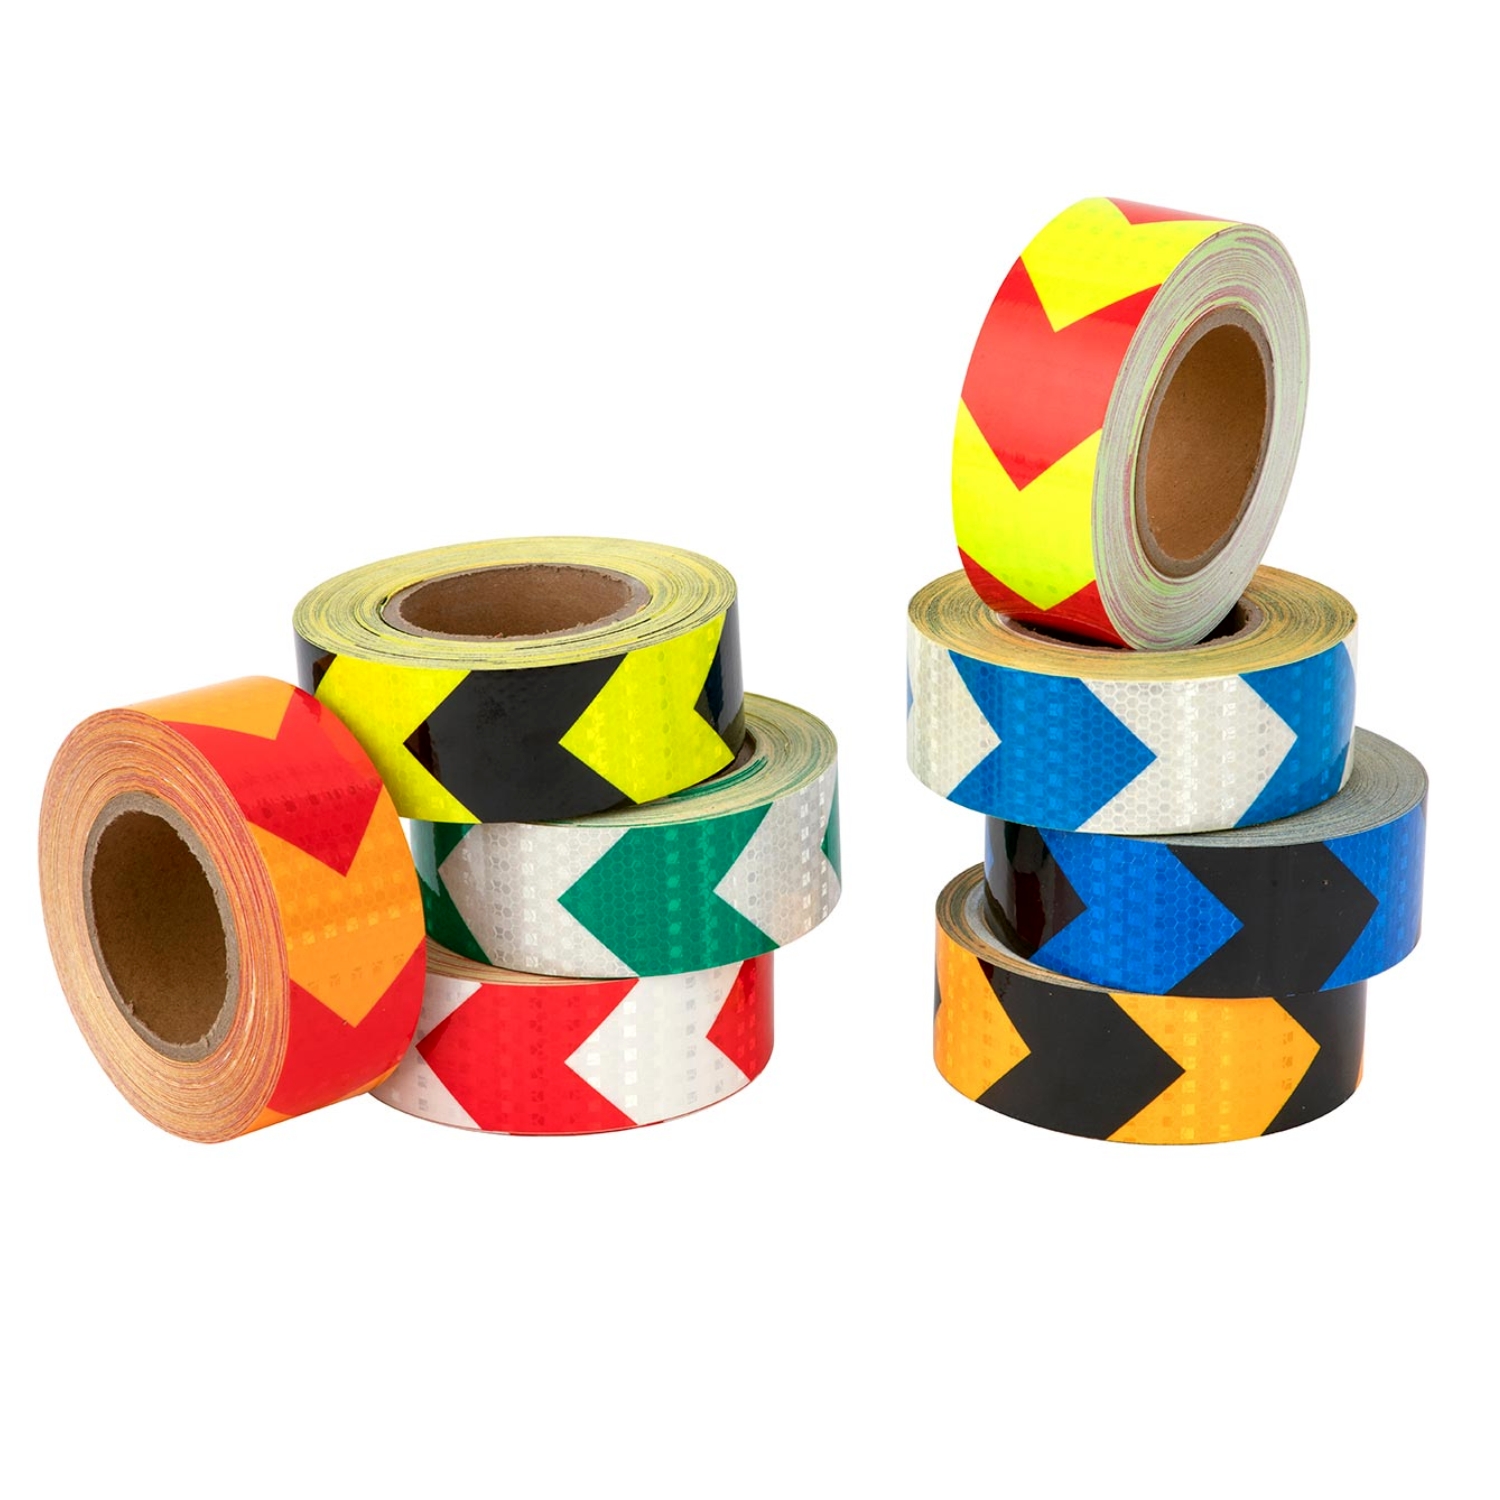 High Visibility Waterproof Adhesive Arrow Reflective Safety Tape Red & Yellow